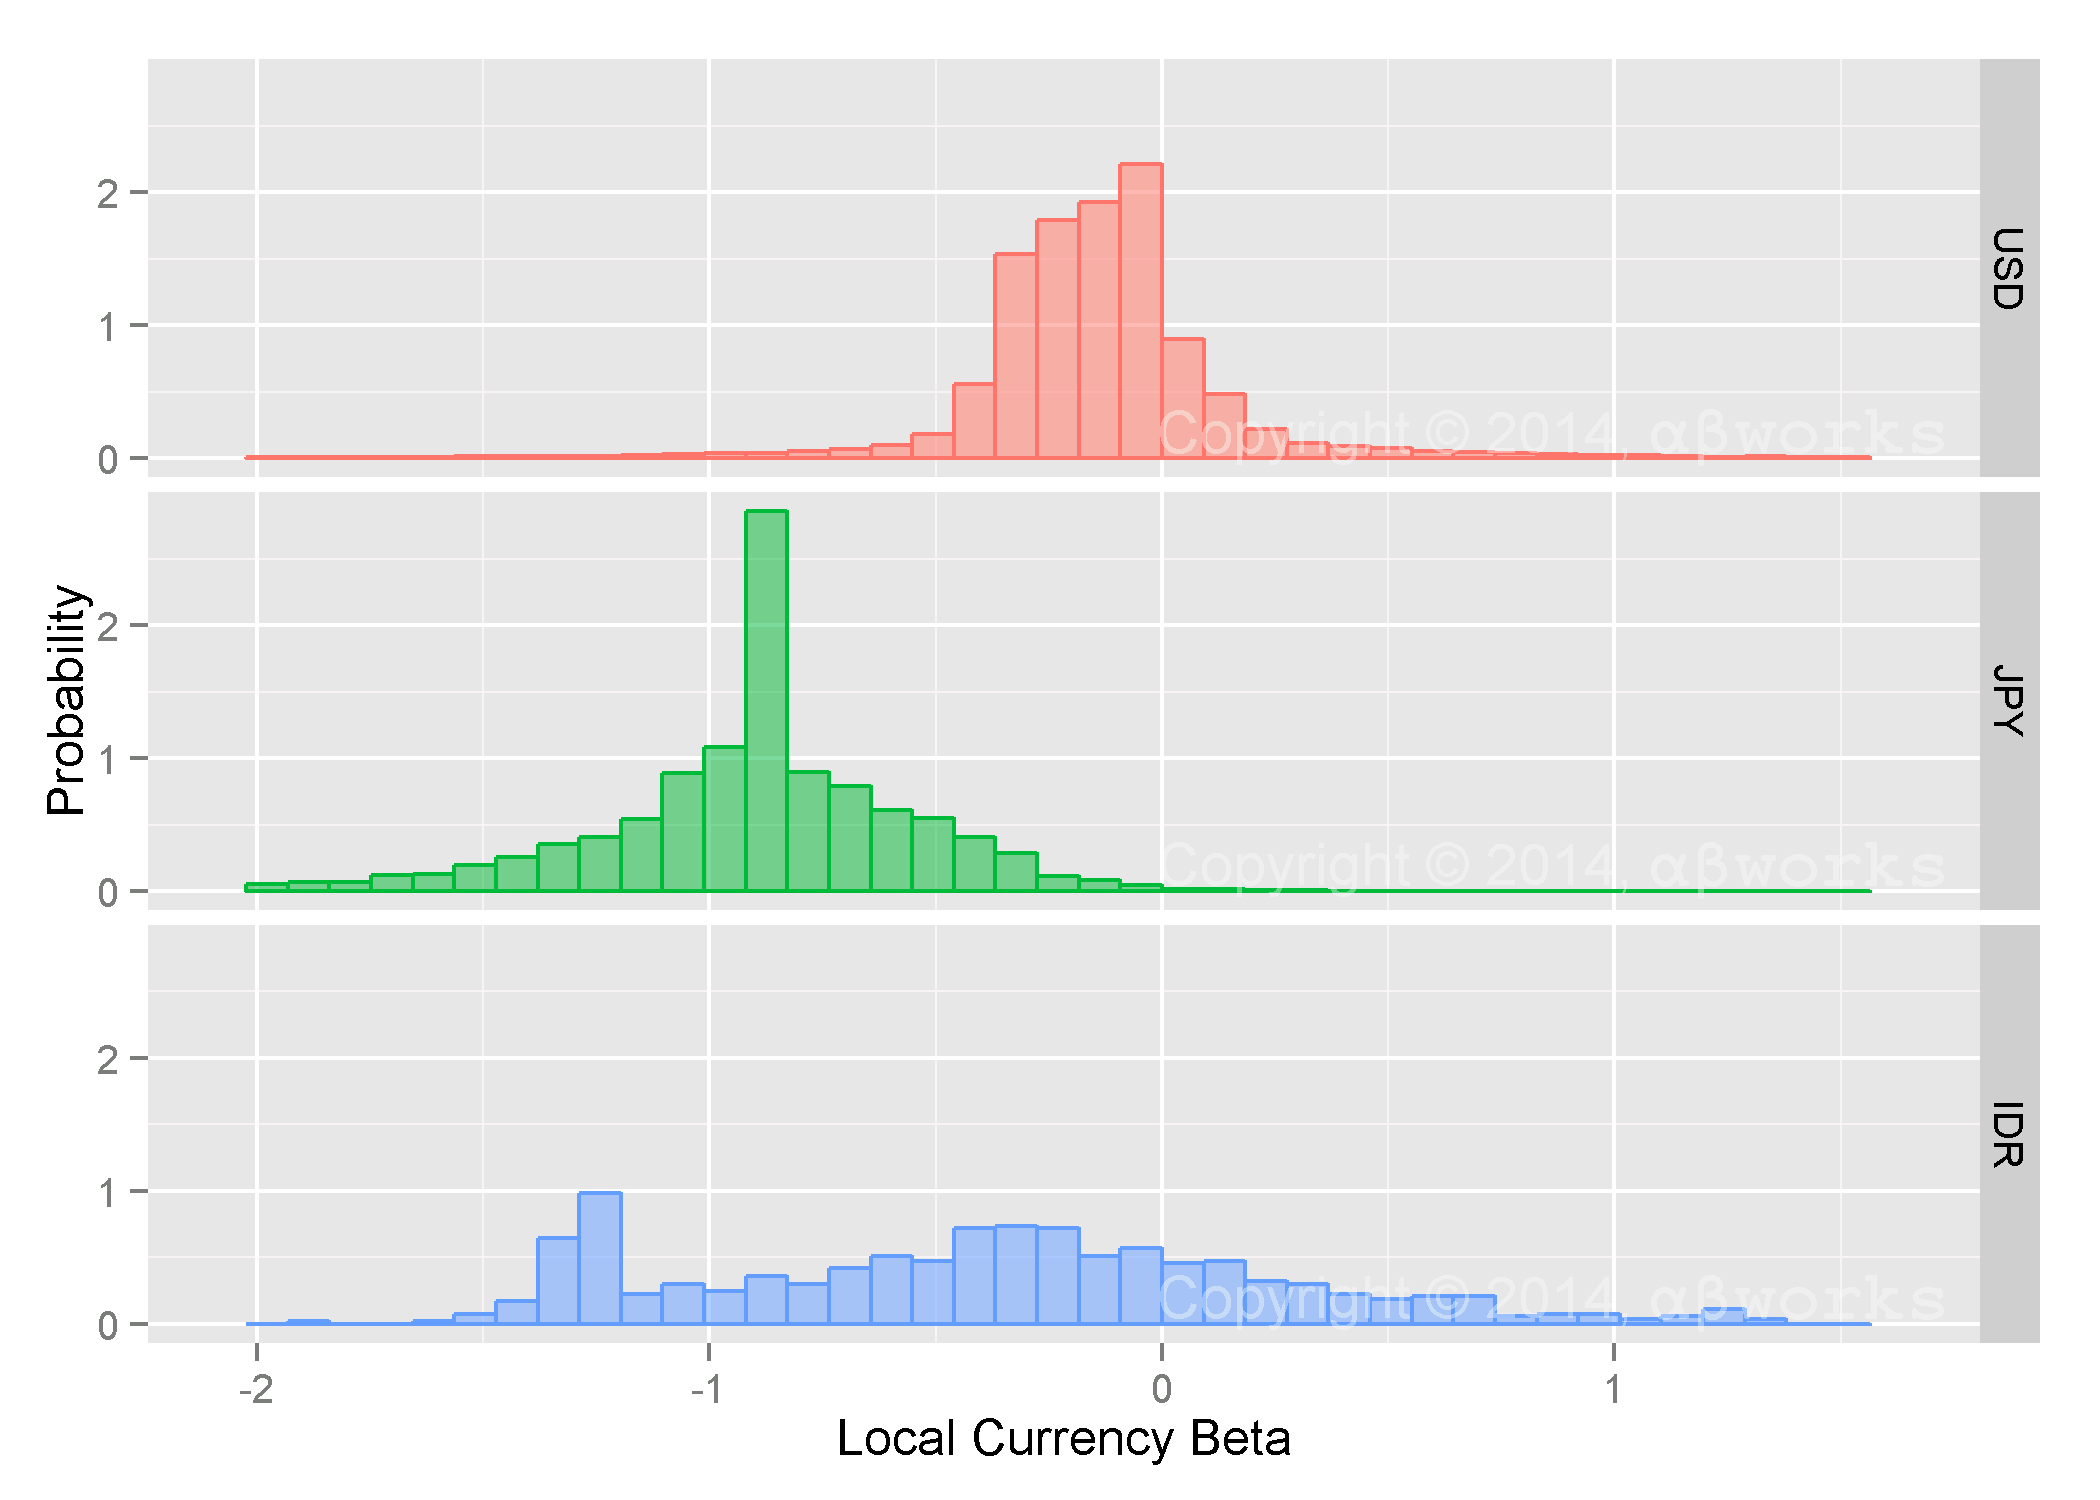 Charts of the Distribution of Local Currency Betas Across Various Markets